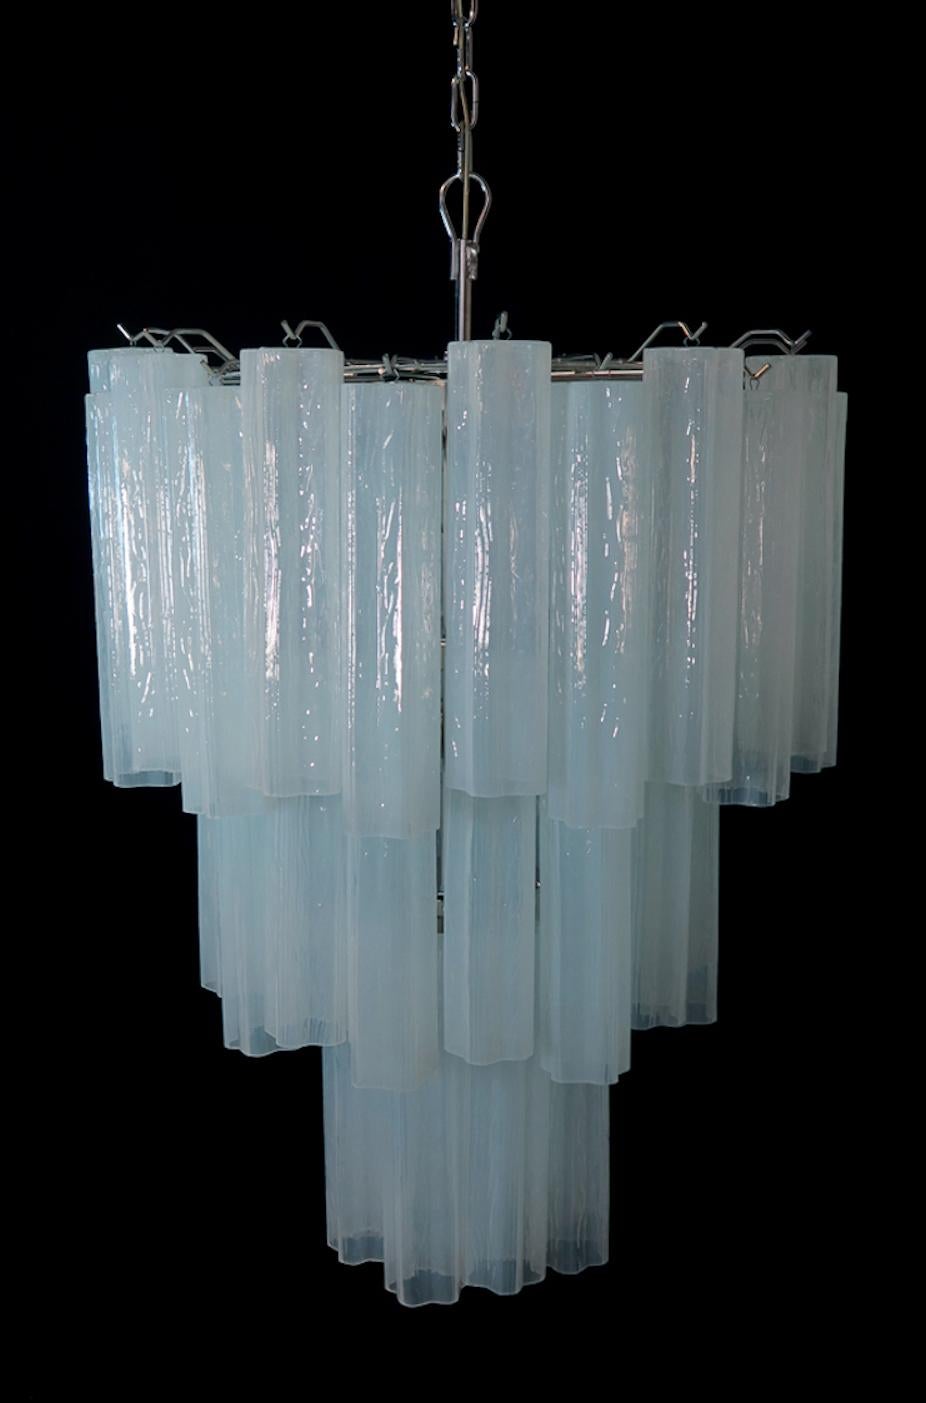 Pair of 48 Tronchi Chandeliers in Toni Zuccheri Style for Venini, Murano For Sale 2